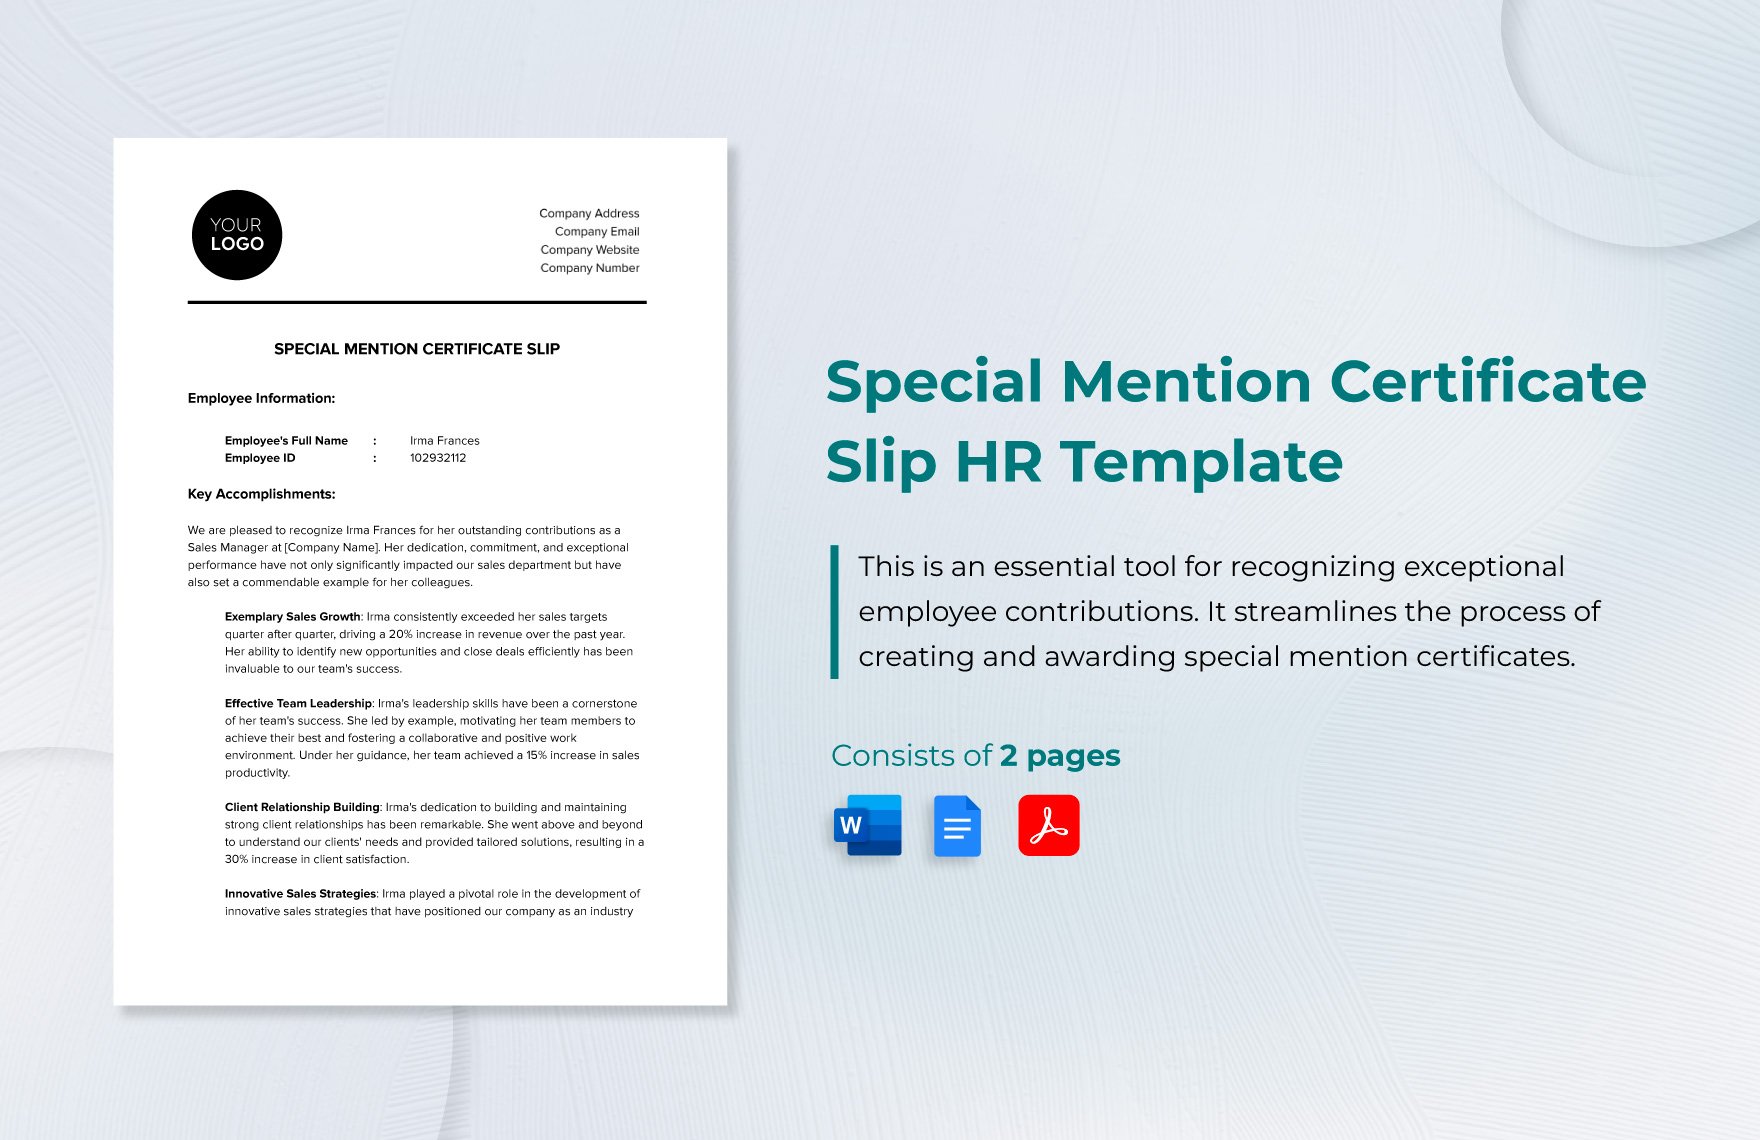 Special Mention Certificate Slip HR Template